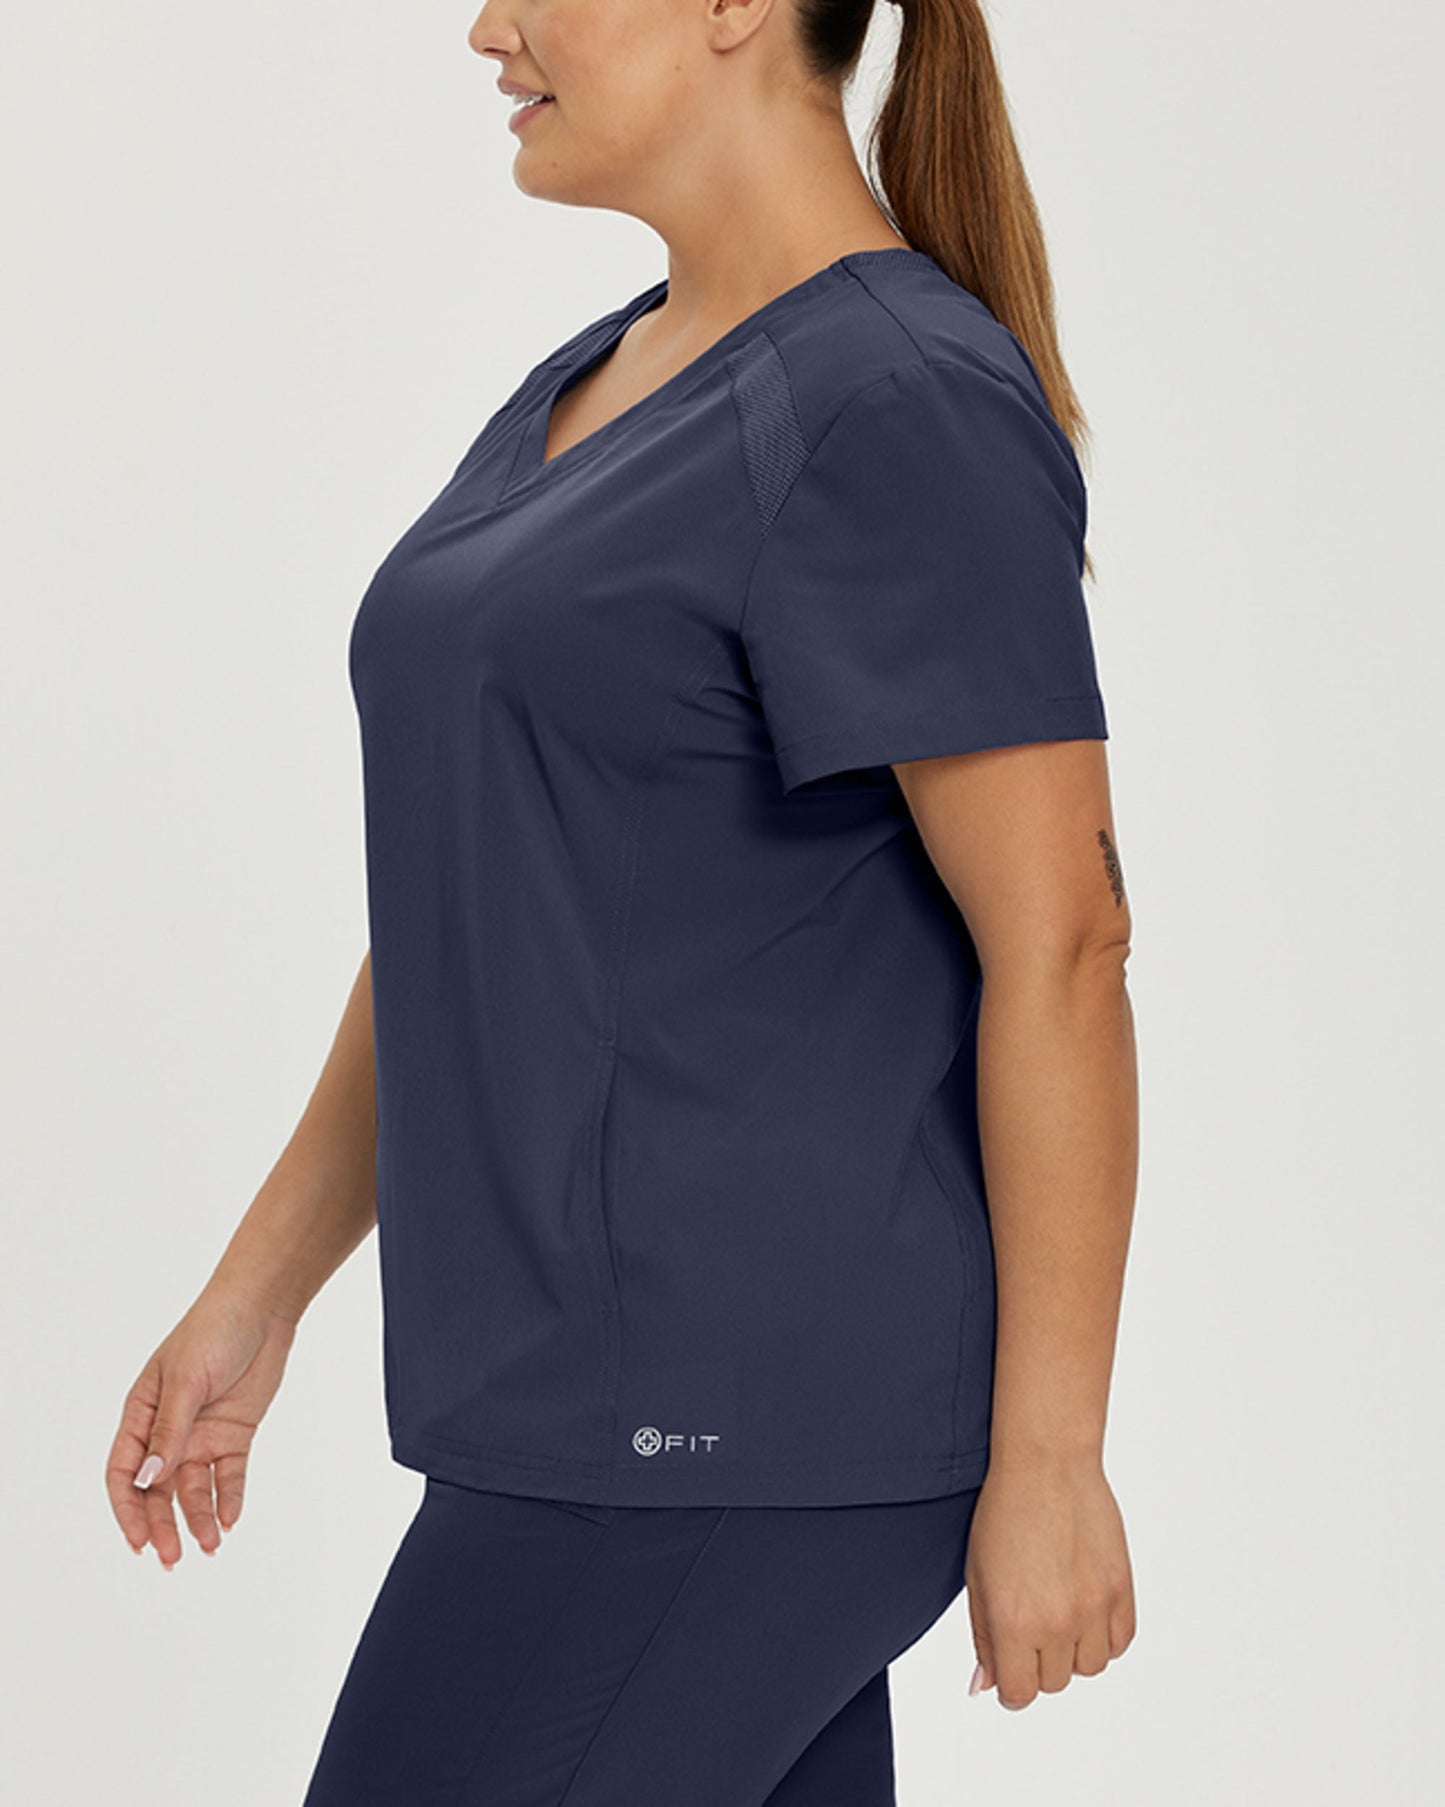 323T - Fitted Criss Cross Women's Solid Scrub Top